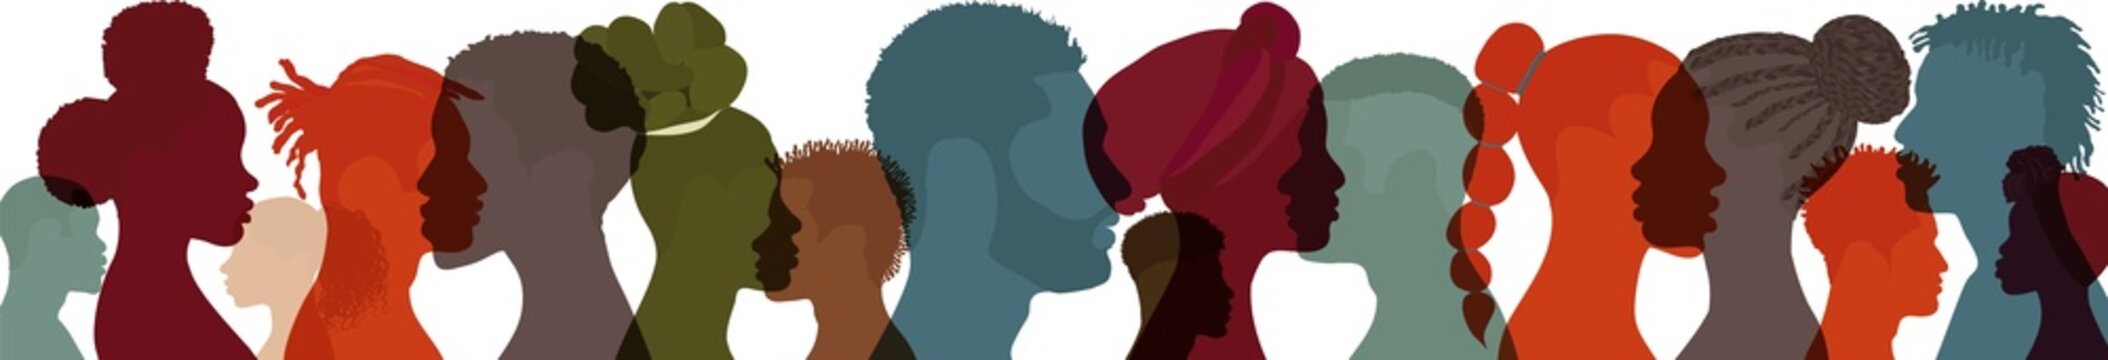 Racial equality and justice - Identity concept. Silhouette face head in profile ethnic group of black African and African American men and women. Racial discrimination. Racism